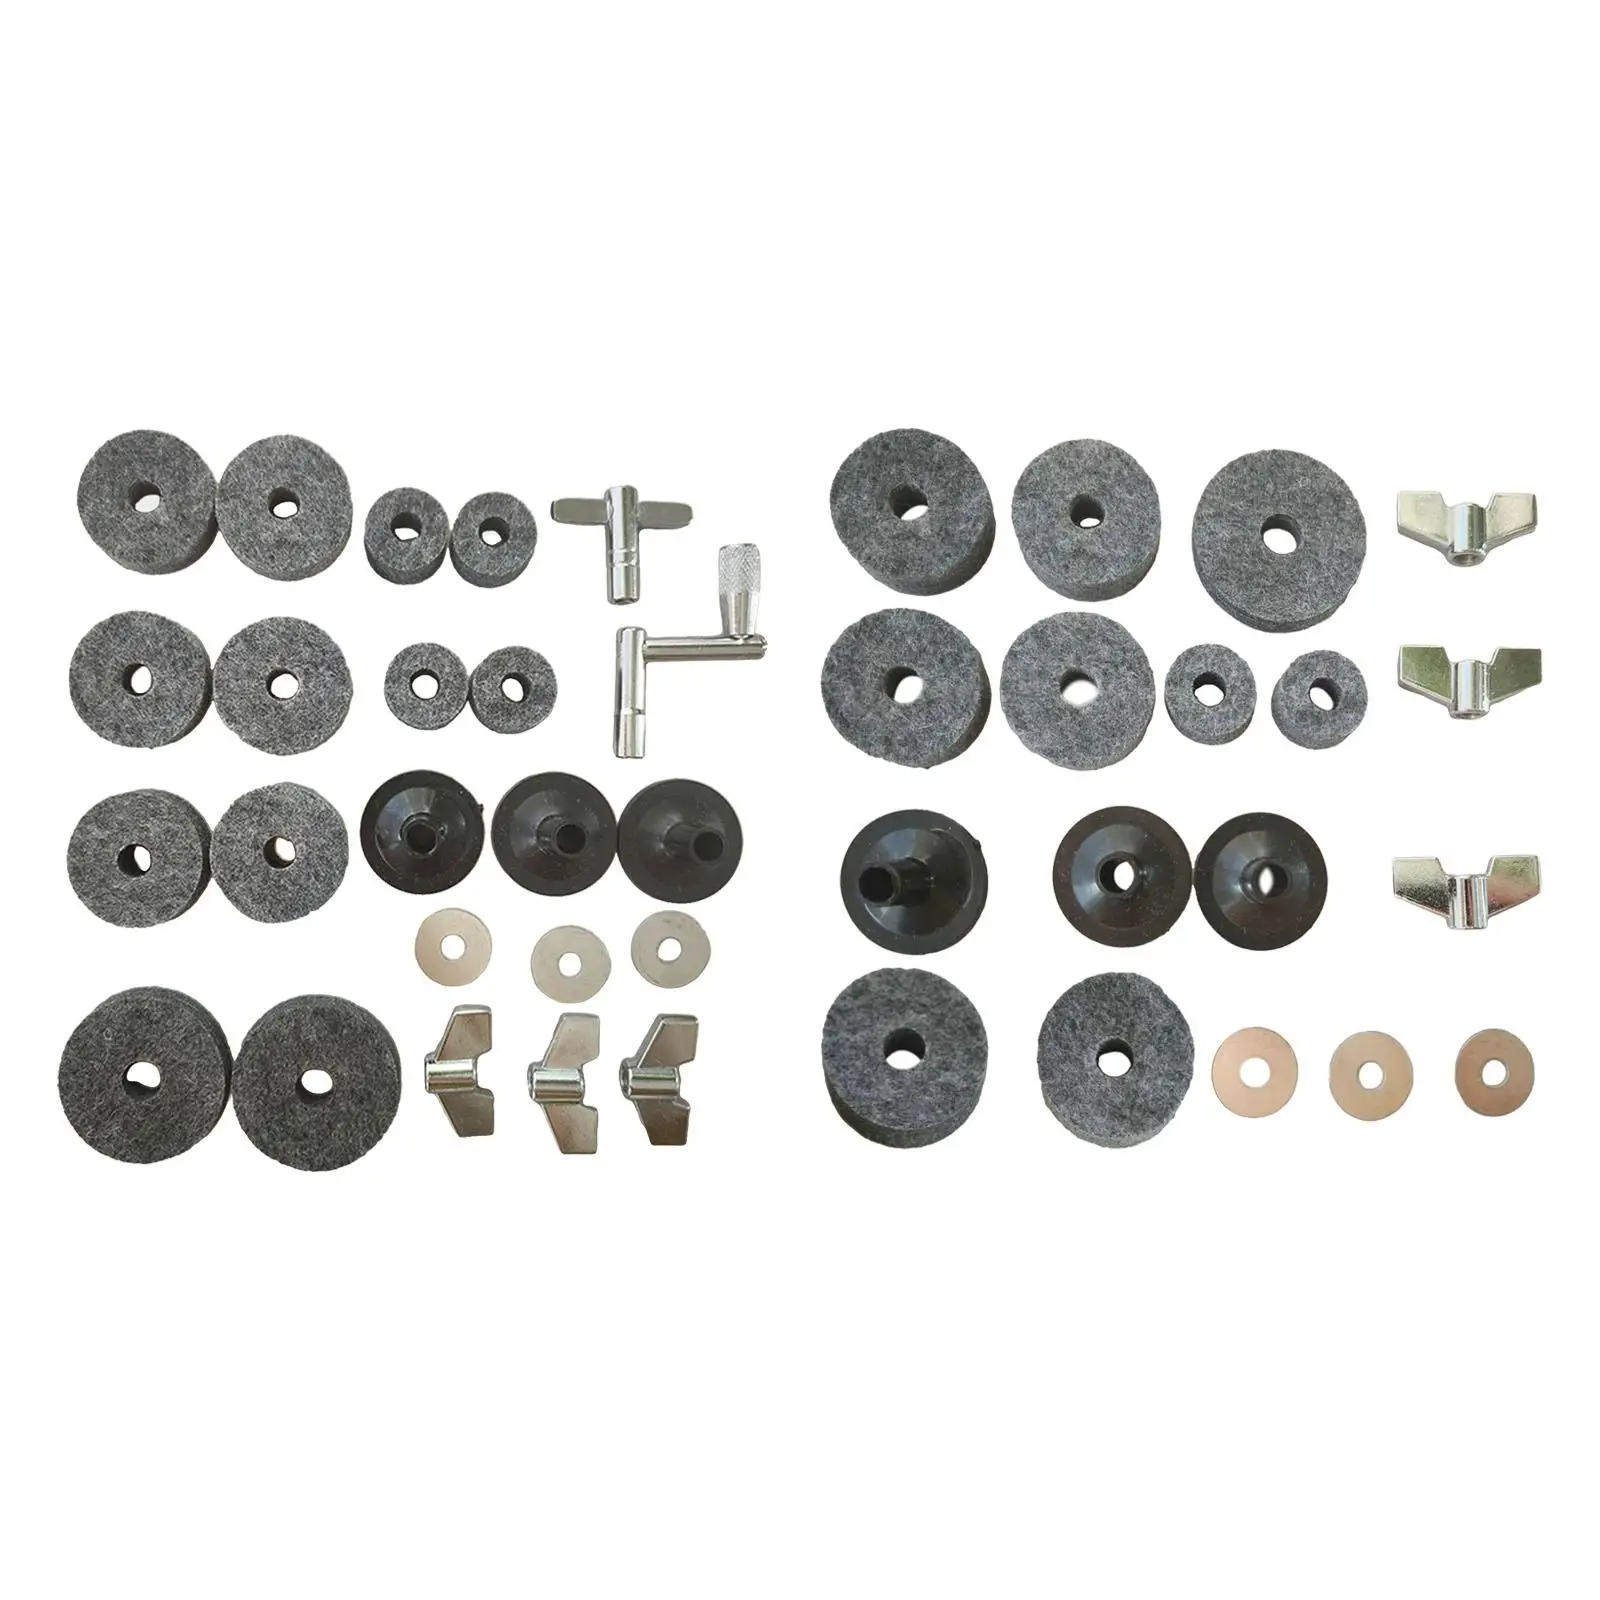 Drum Replacement Parts Cymbal Felts Kits Wing Nuts Felts Drum Keys Durable Lightweight Cymbal Washer Hi Hat Clutch Felt